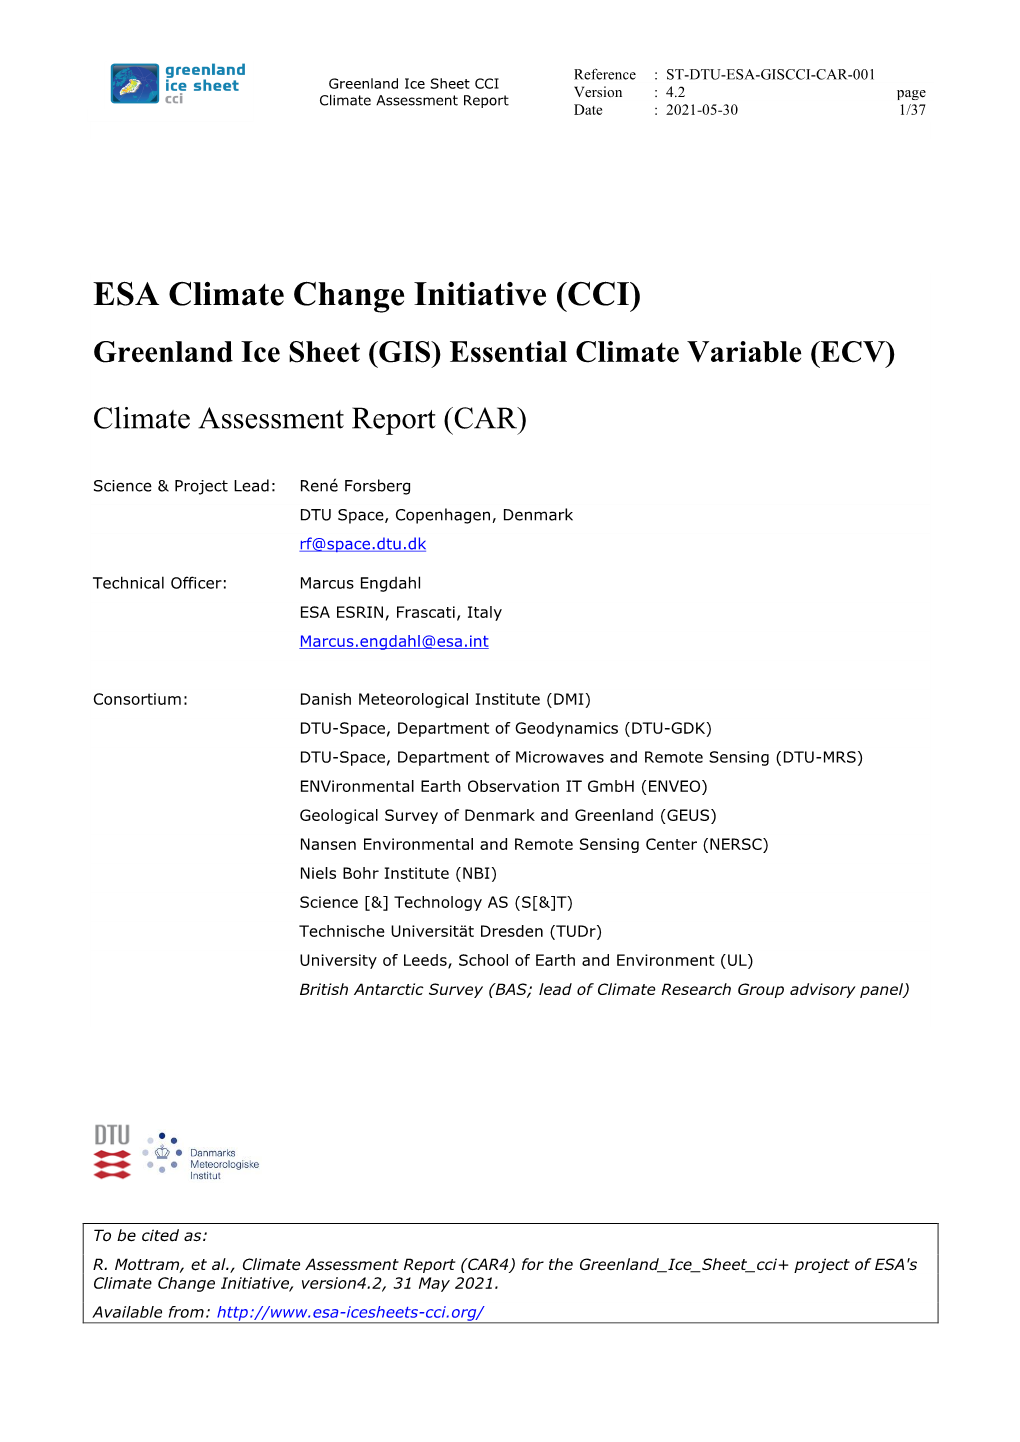 Climate Assessment Report (CAR)